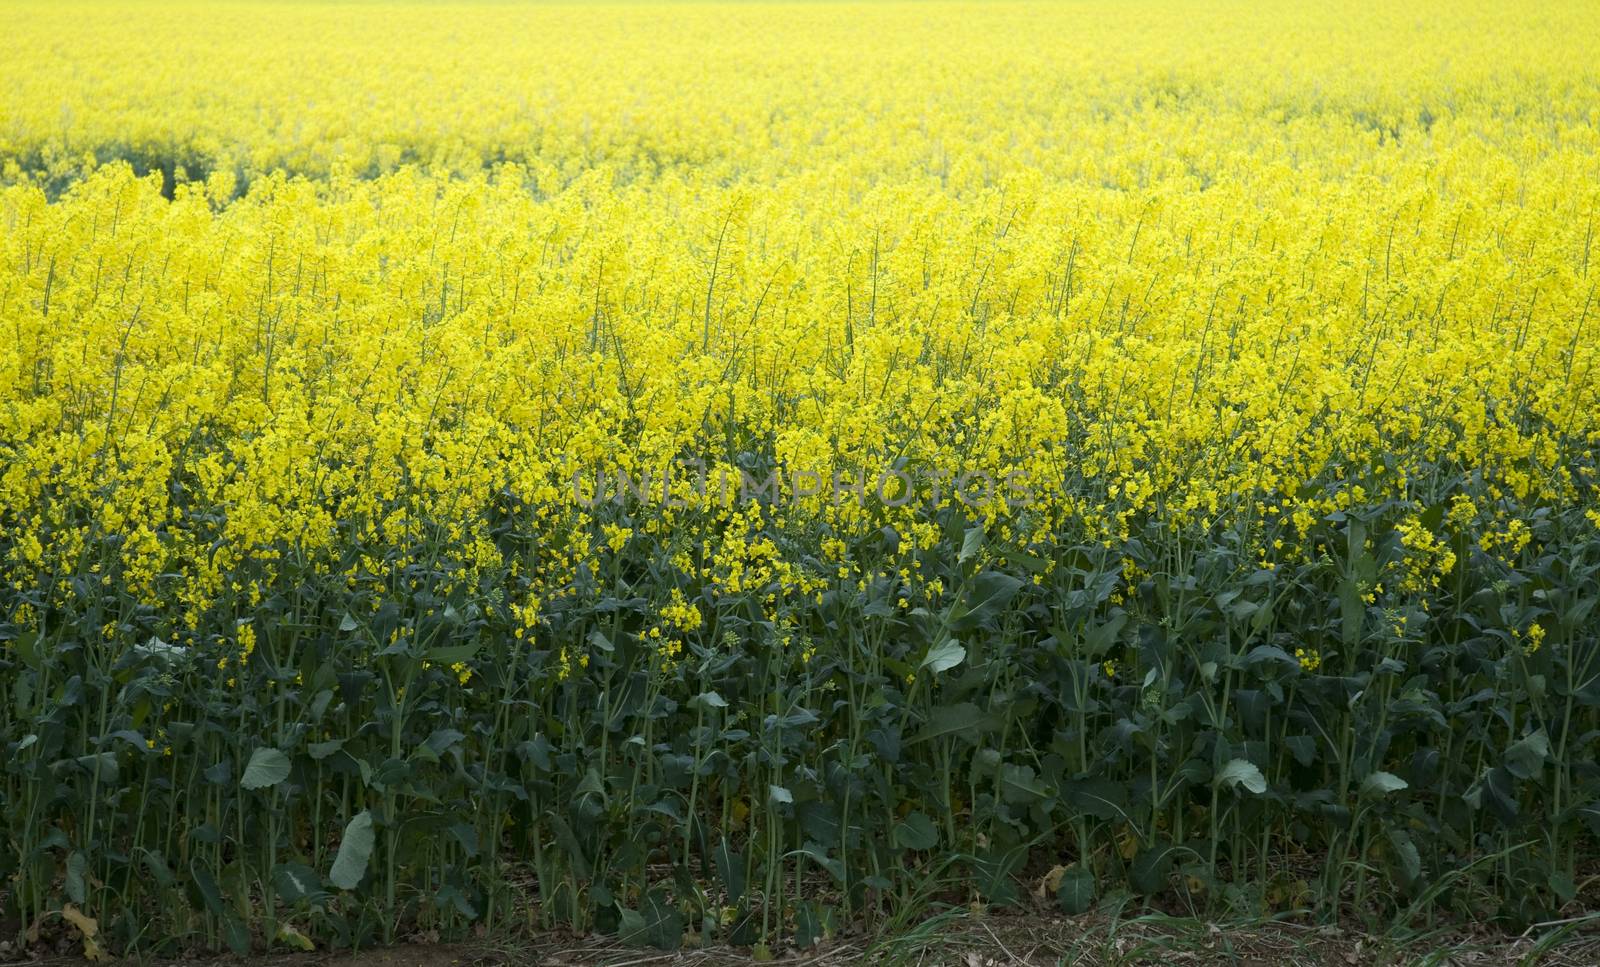 A field full of bright yellow oil seed rape